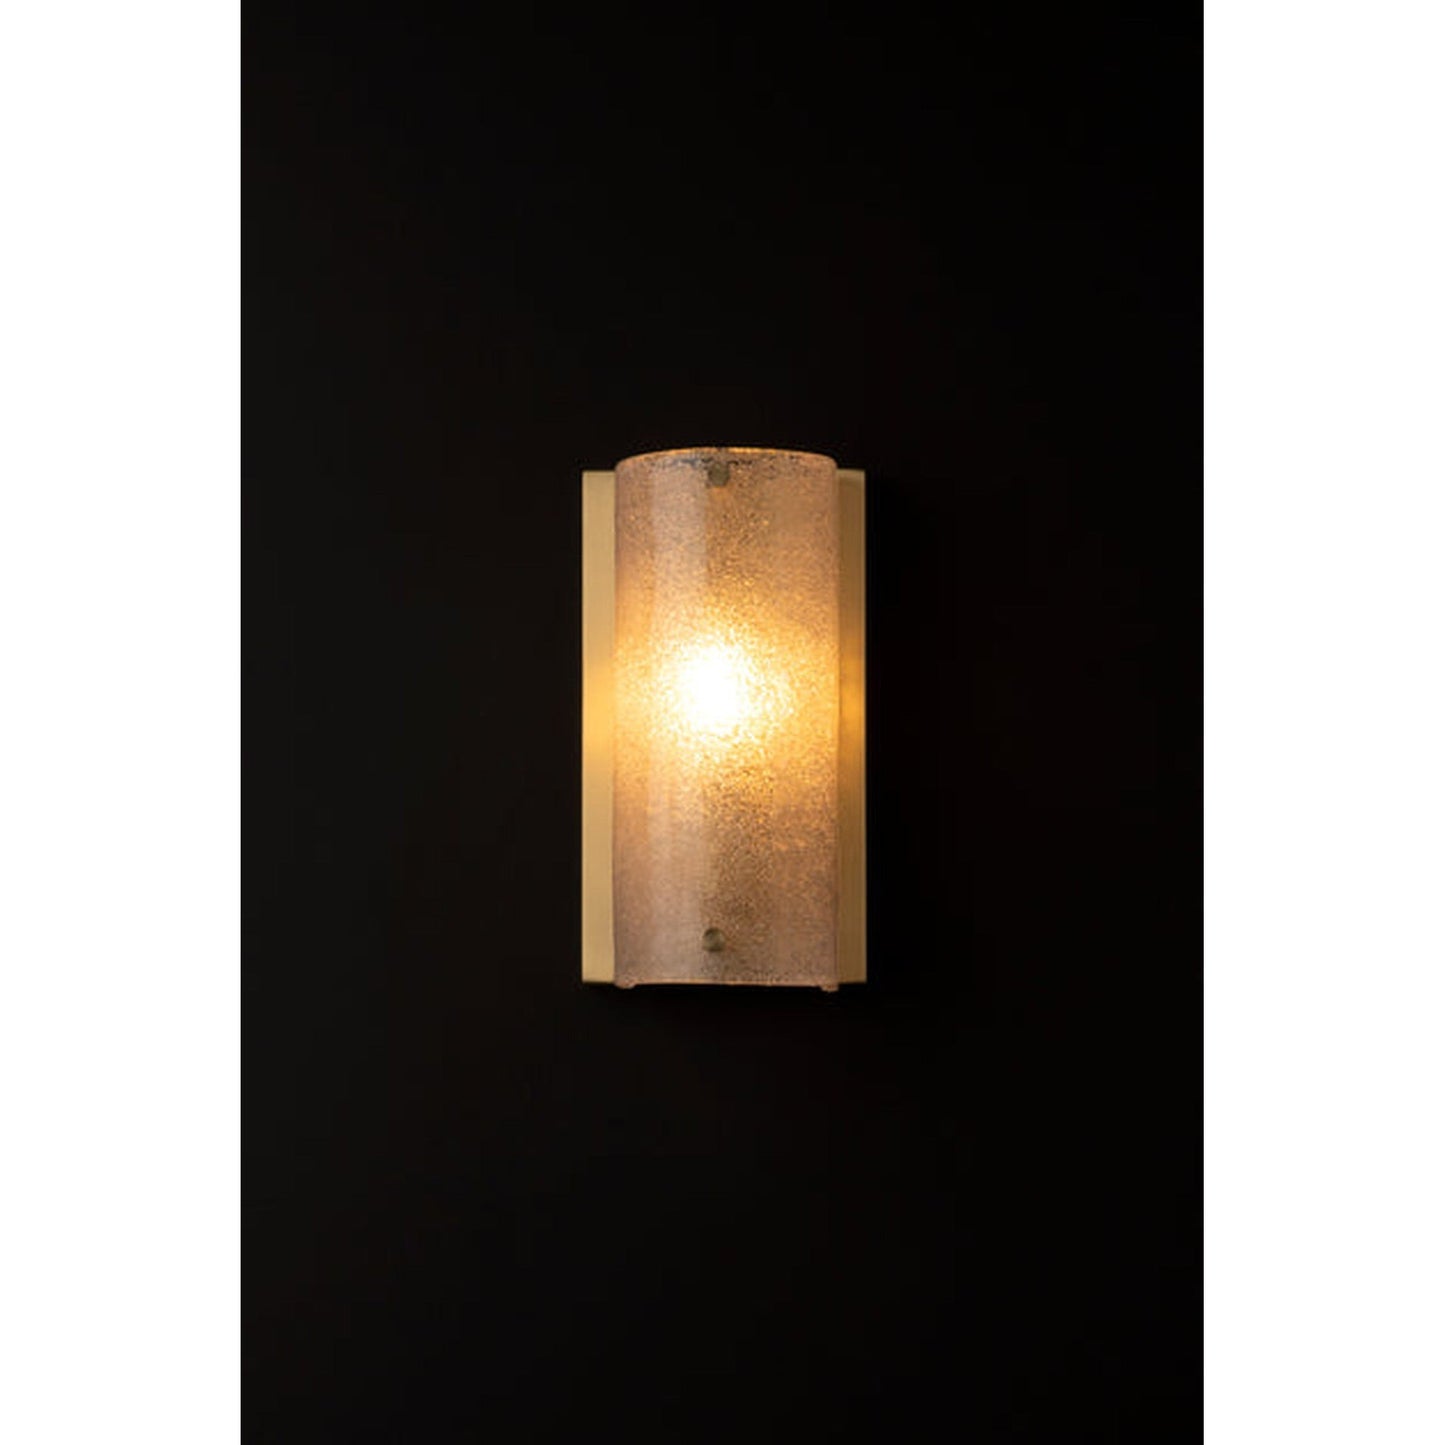 The Vault Easton Frosted Antique Wall Sconce